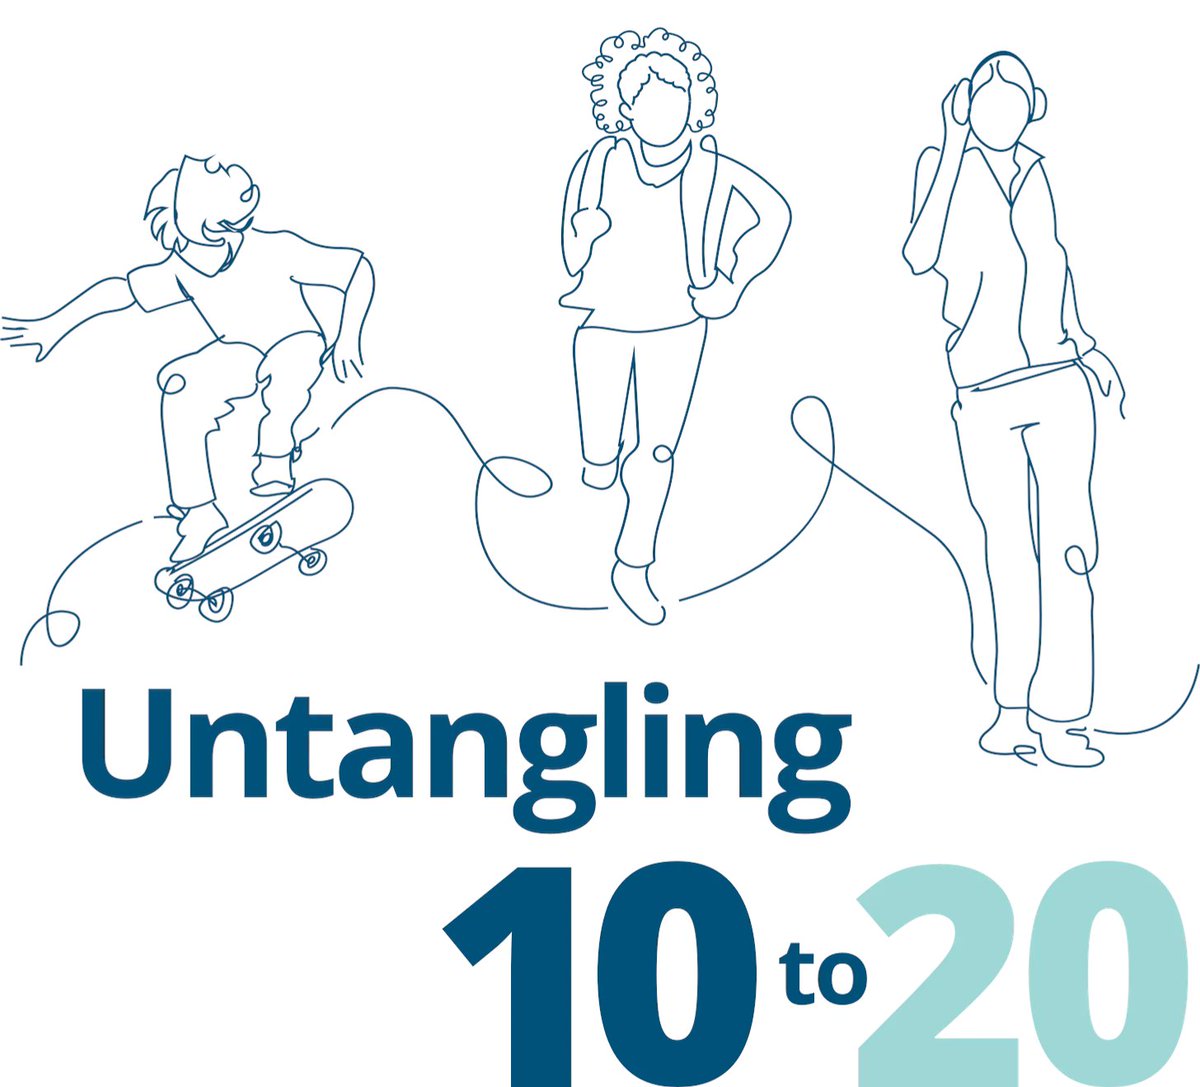 8. @LDamour's latest project, 'Untangling 10 to 20,' is a membership site that provides unlimited access to just-in-time advice and research-backed guidance for parents, caregivers, educators, and teens.